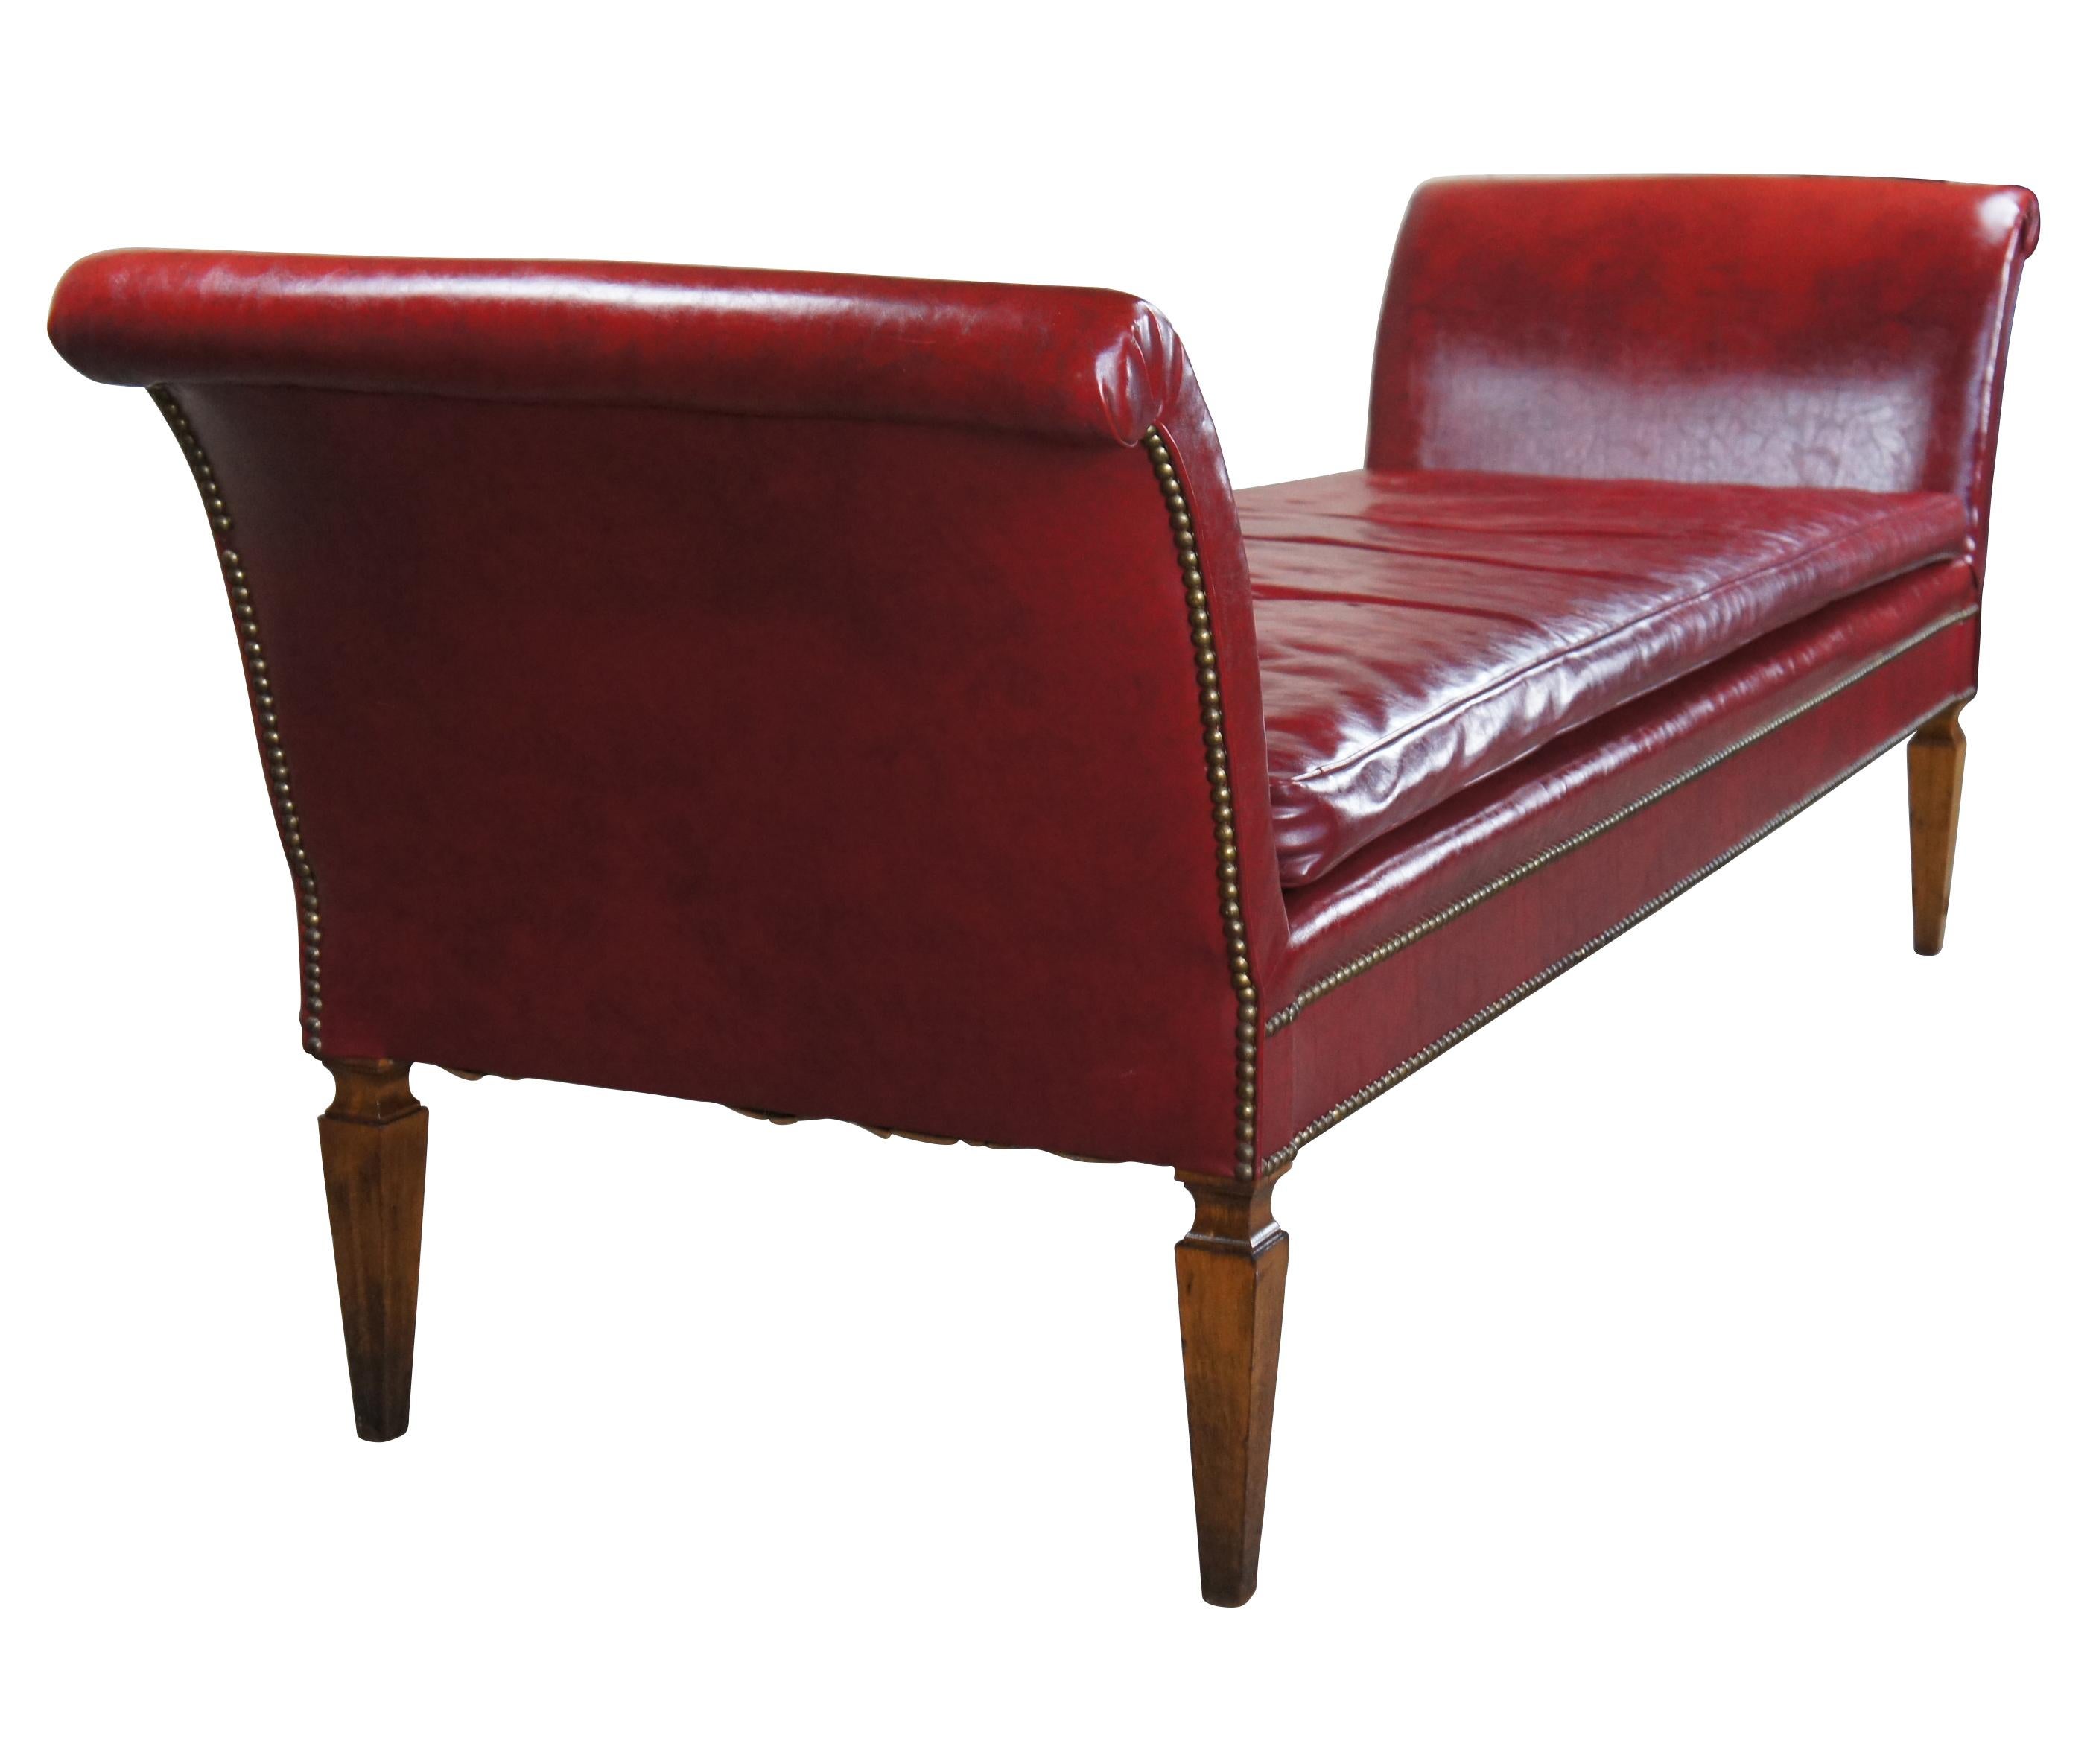 Mid-Century Modern Midcentury Mahogany & Red Leather Scroll Arm Chaise Lounge Daybed Bench For Sale